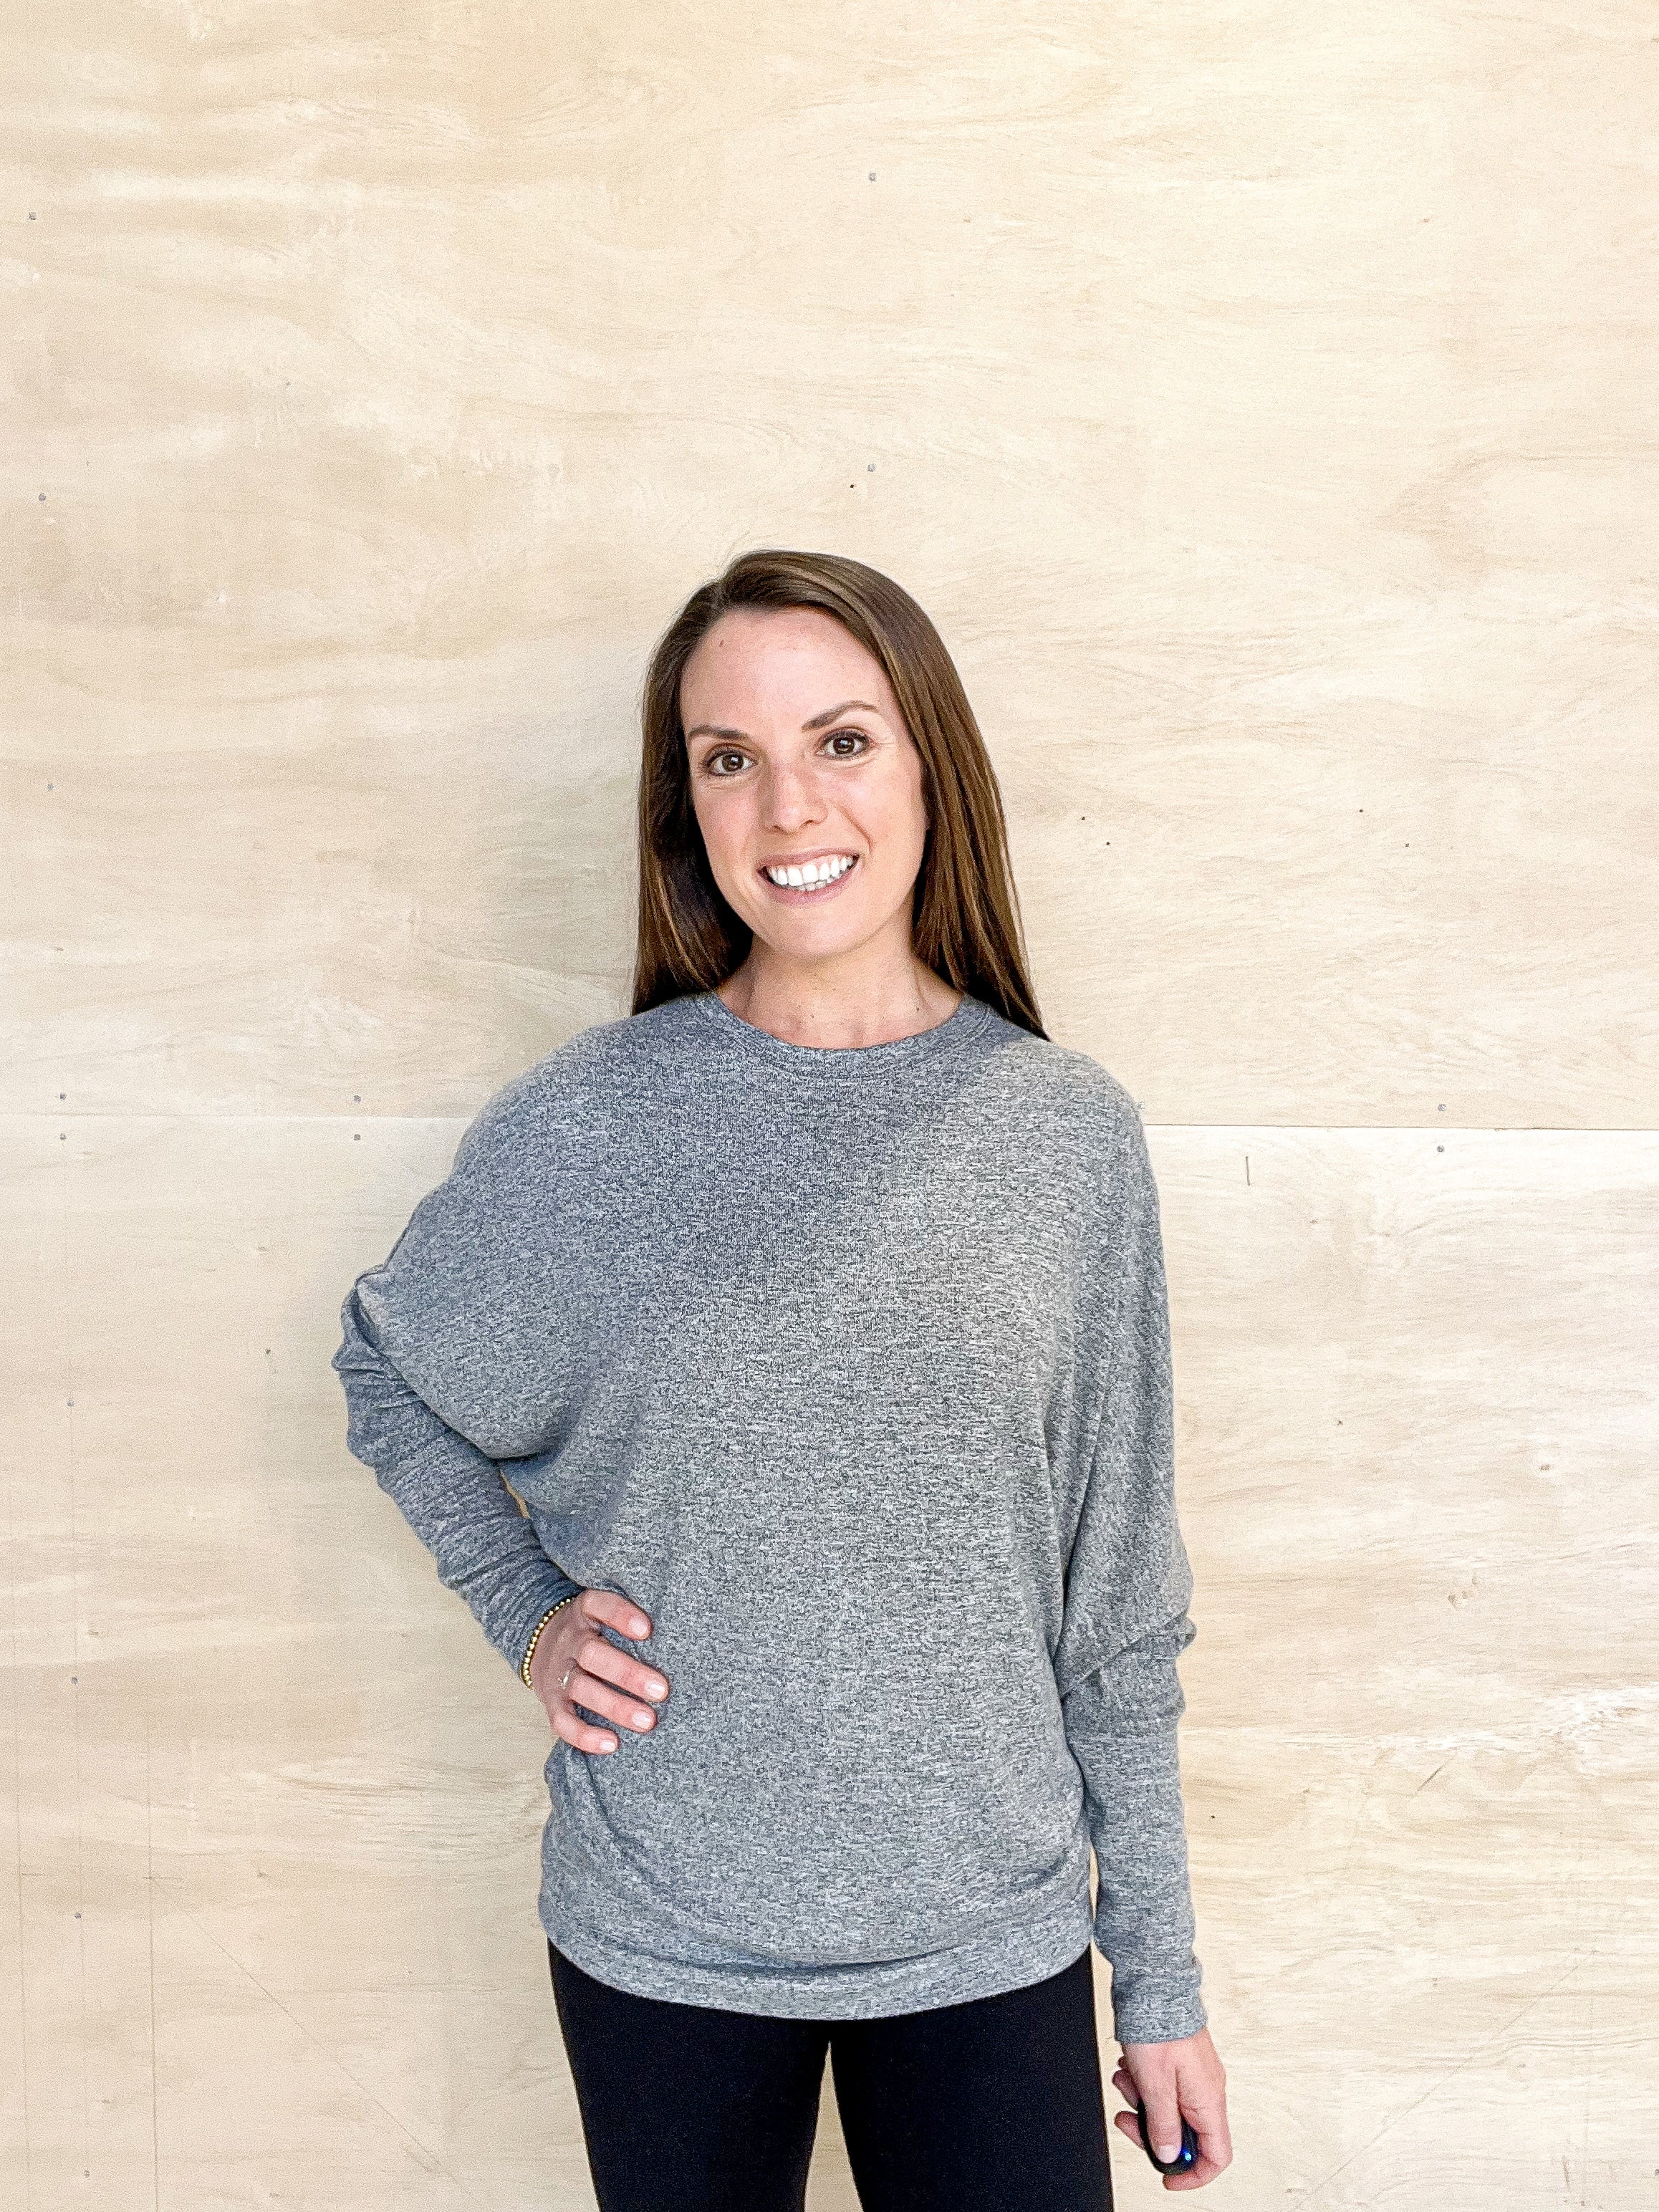 long sleeve, fun sleeve detail, heather grey color, soft material, relaxed body